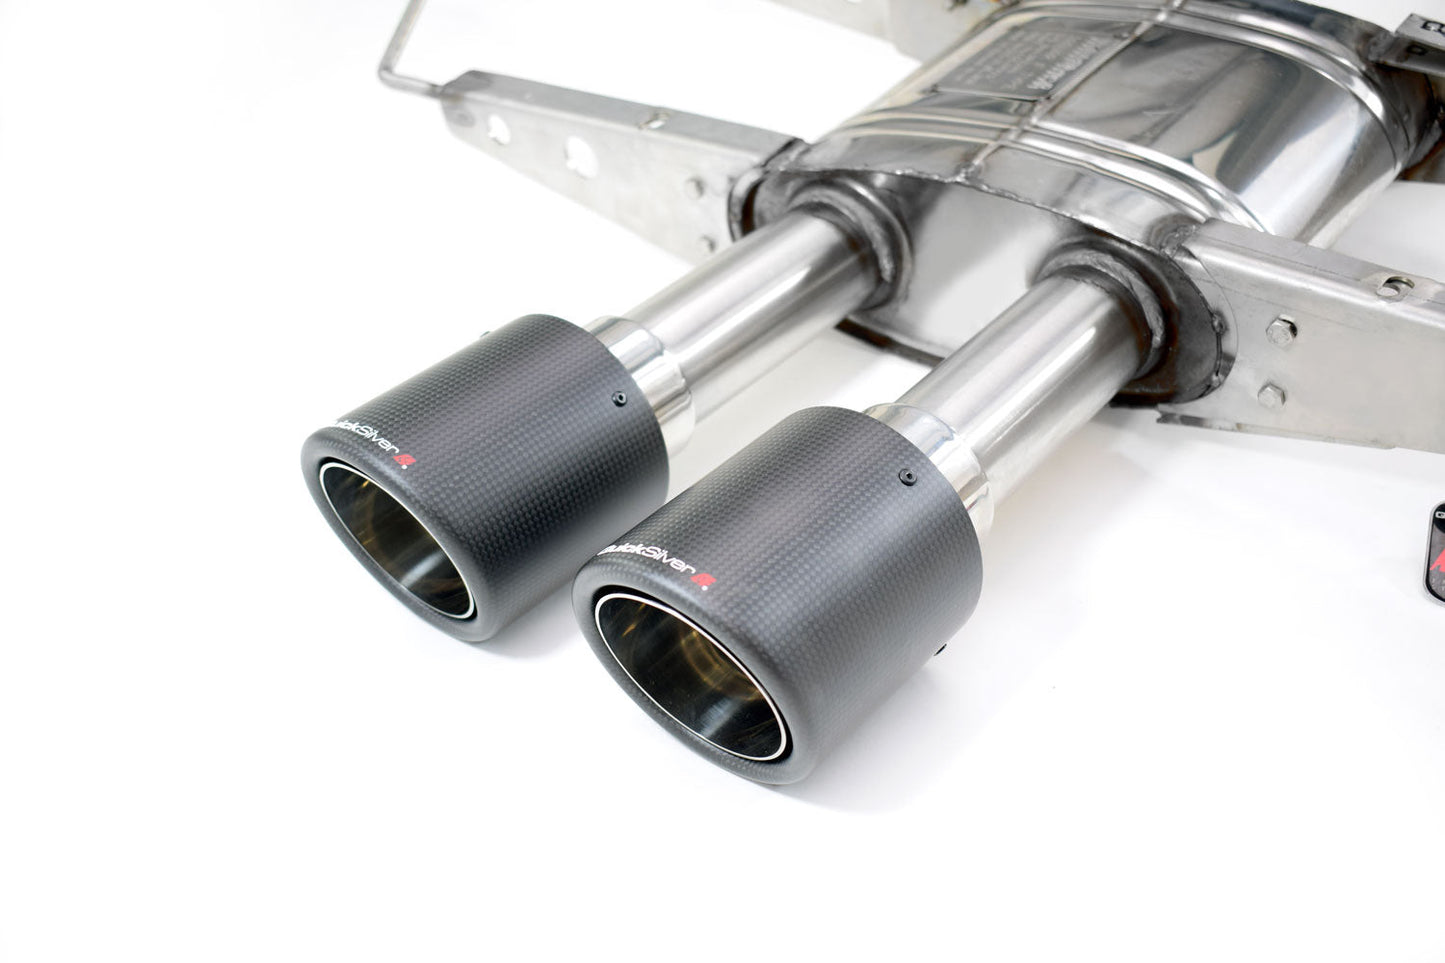 Jaguar F Type V6 Coupe, Convertible Sport Exhaust (2014 on) - QuickSilver Exhausts